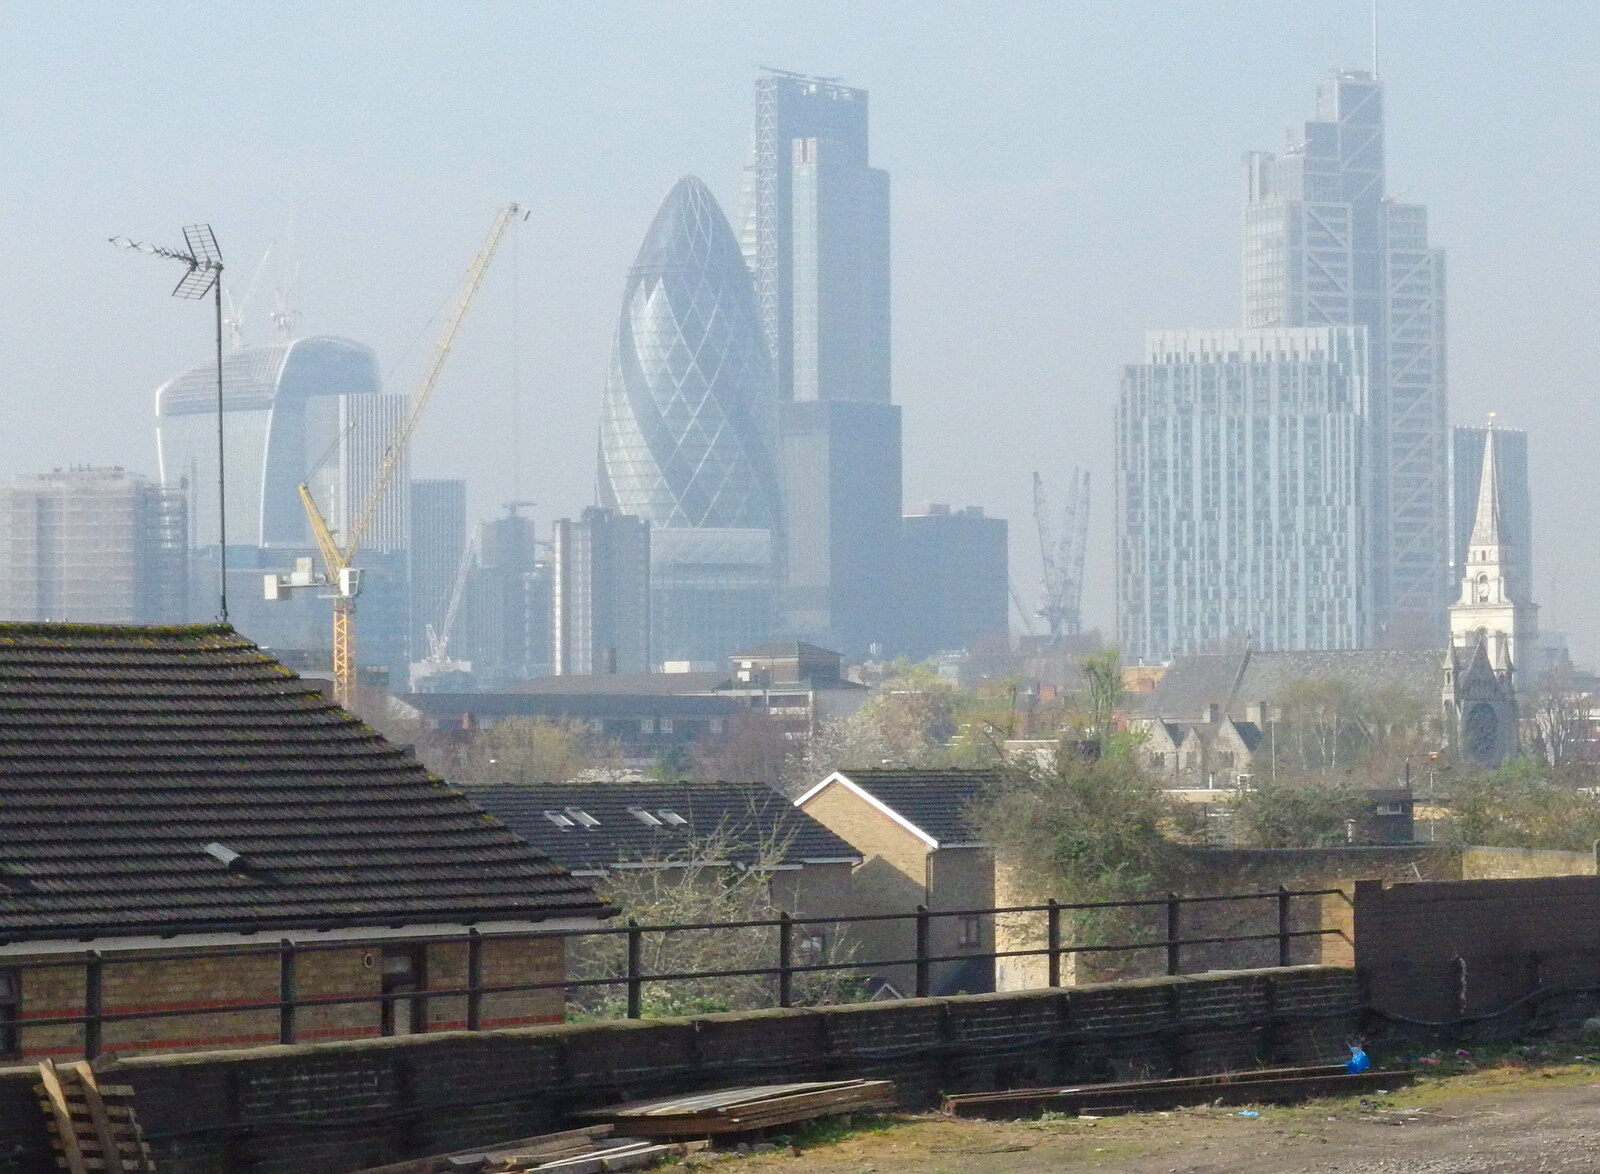 A smoggy City of London, on 'pollution alert' day from A Trainey Sort of Week, Liverpool Street, City of London - 3rd April 2014